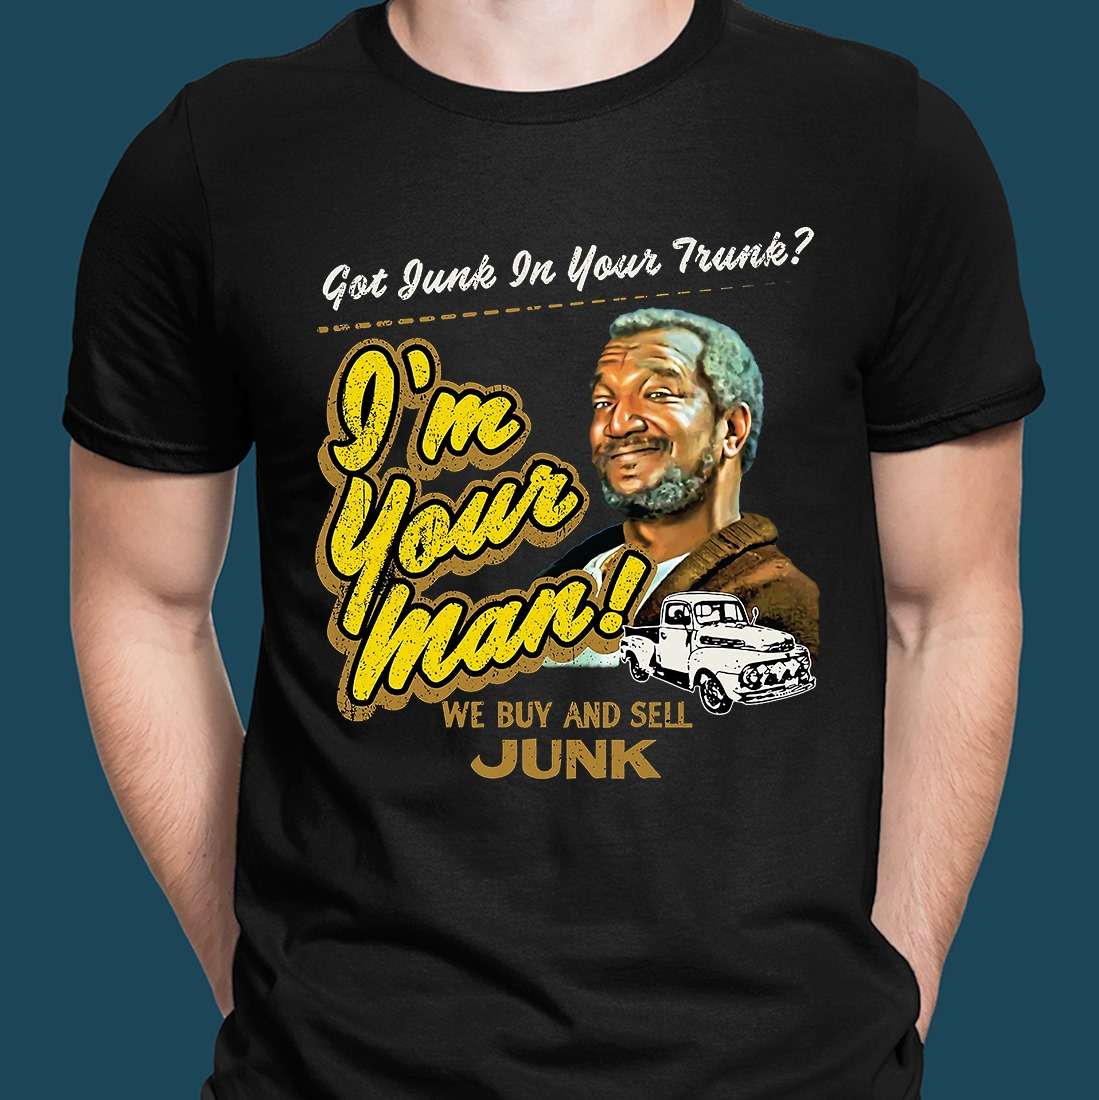 Got Junk in your trunk? I'm your man! We buy and sell junk